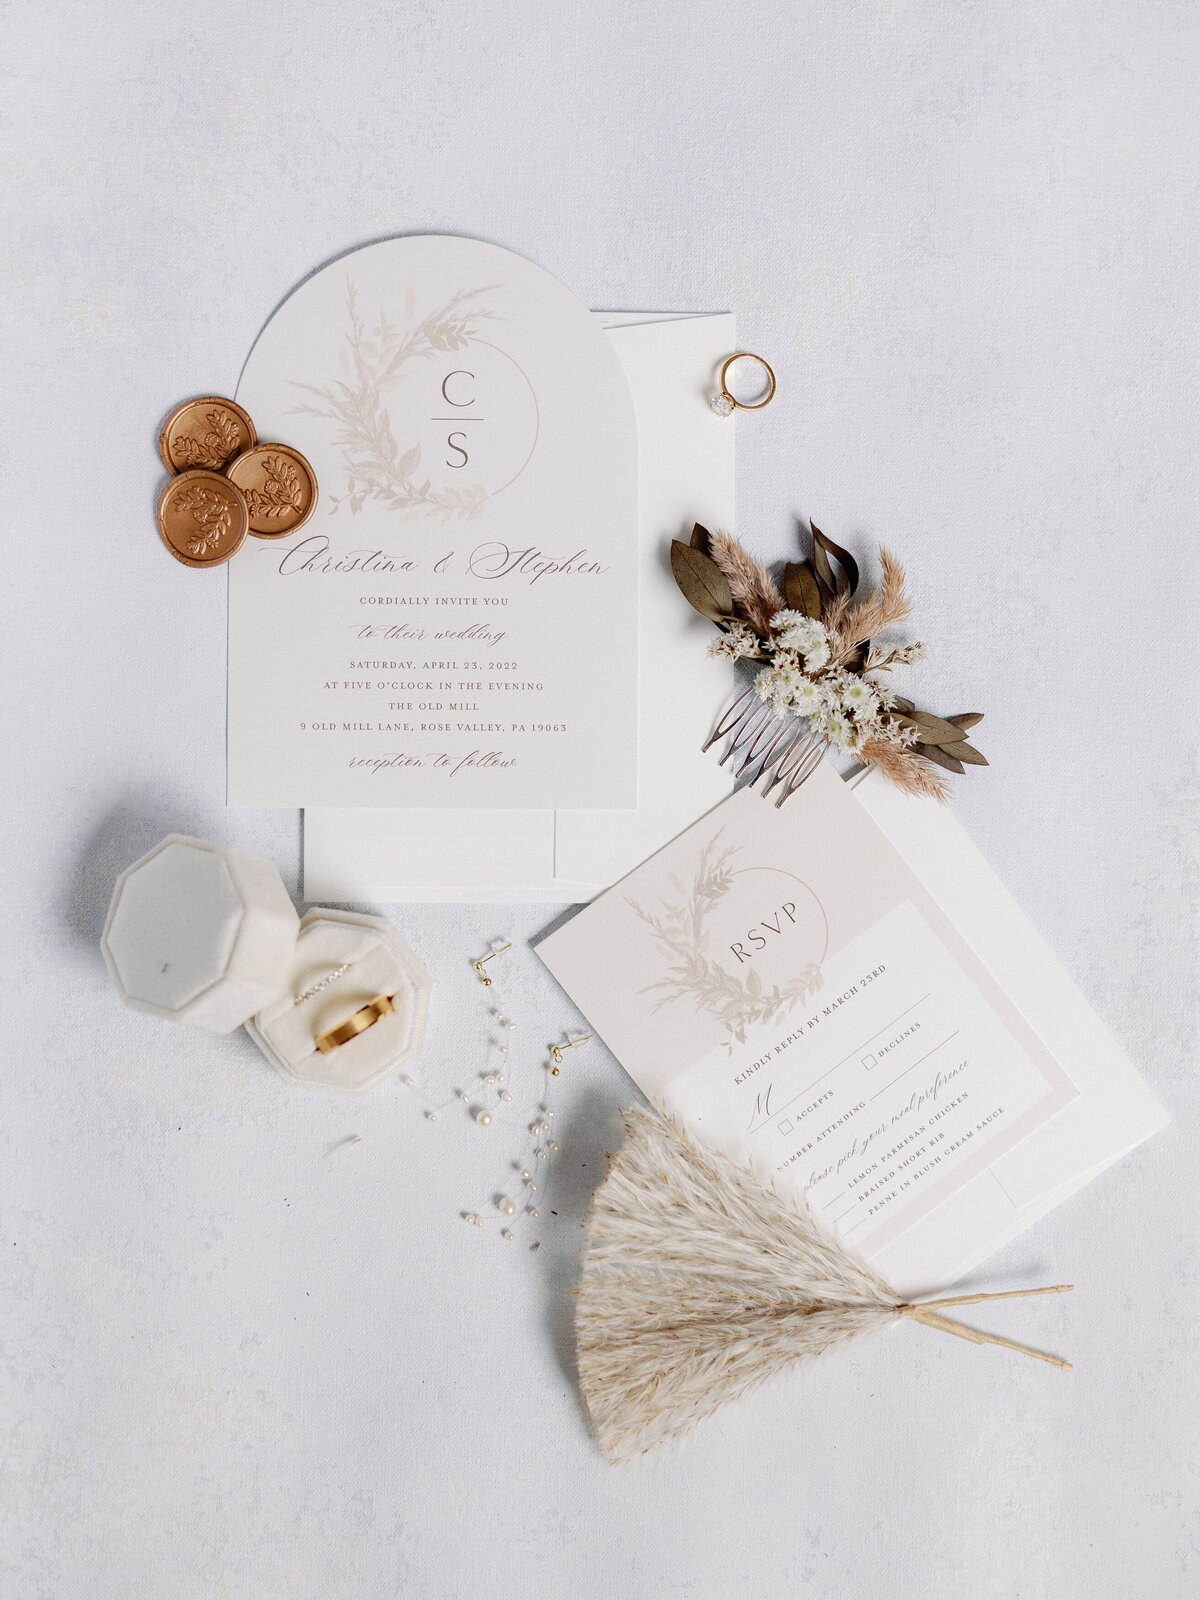 A top down view of a wedding invitation and bridal details